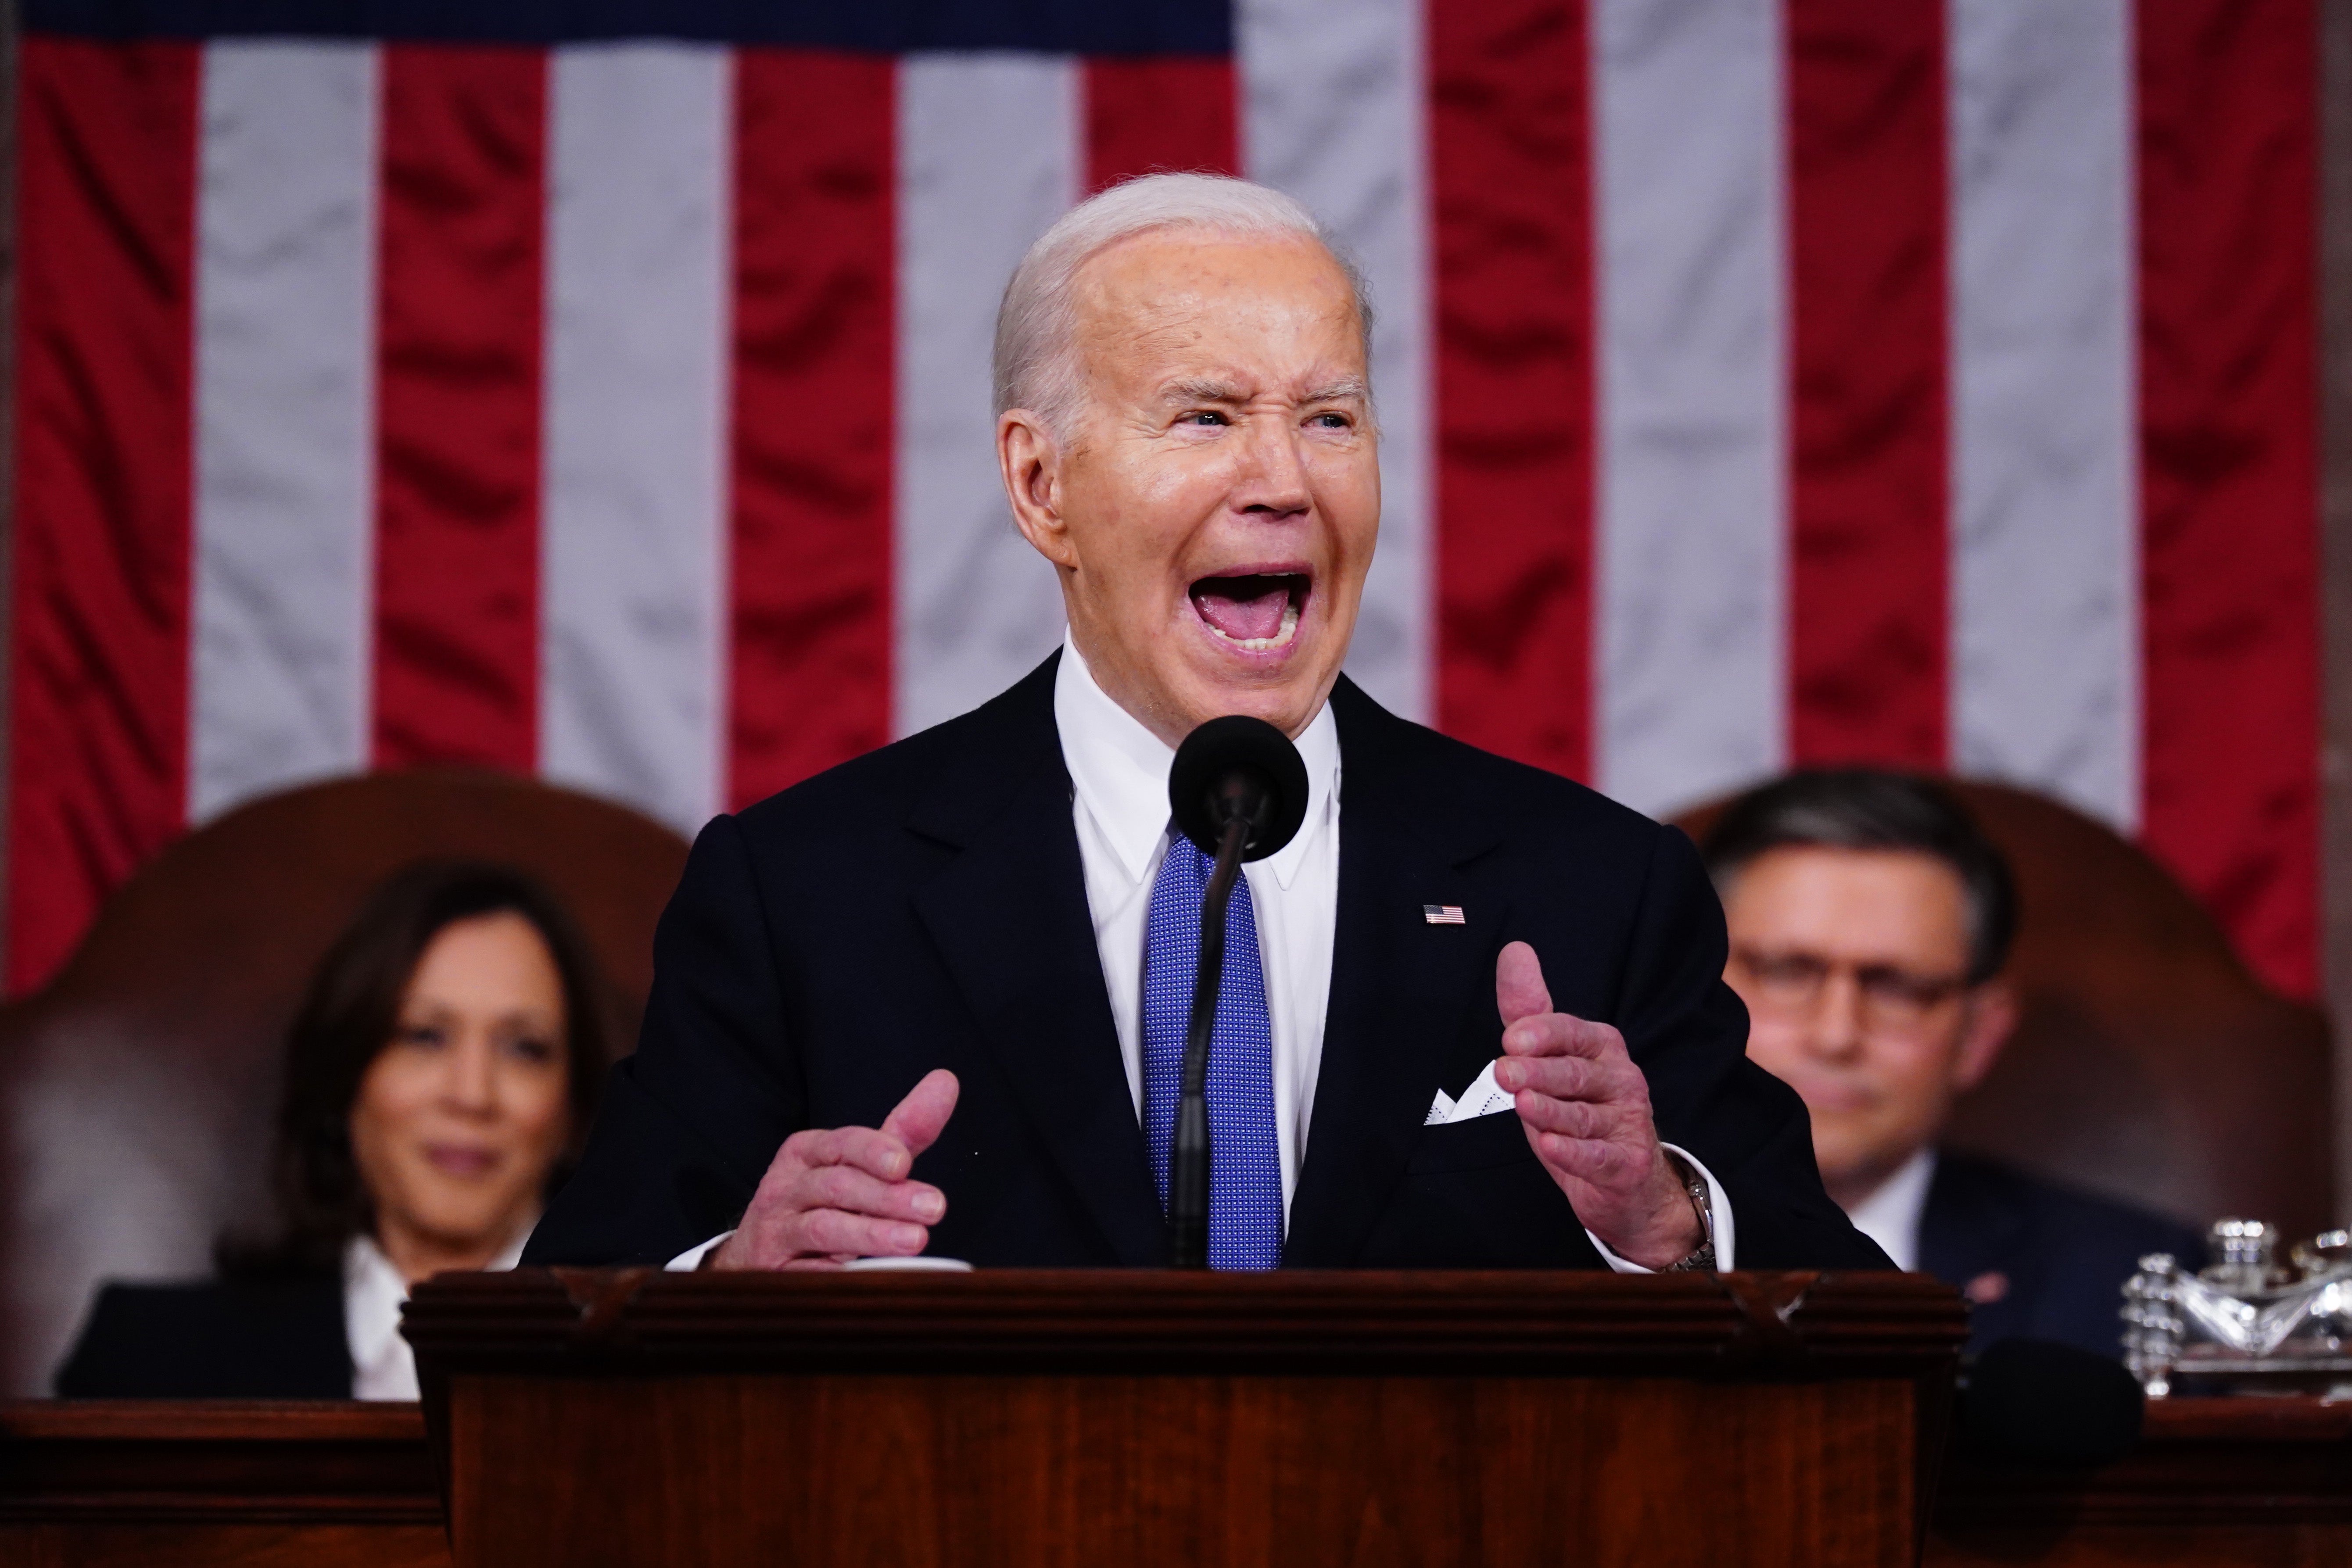 Joe Biden delivered his State of the Union address on Thursday